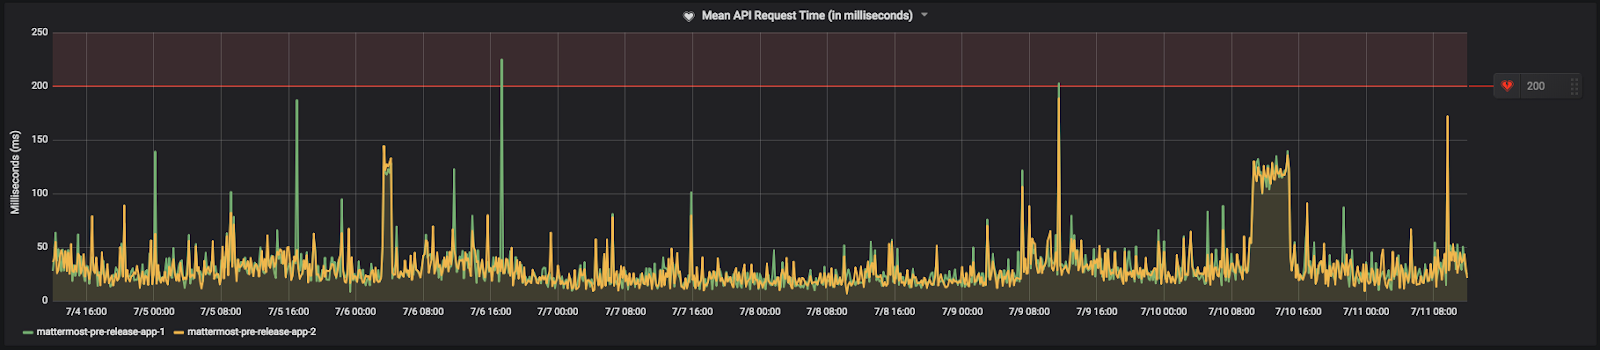 Mean API Request Time